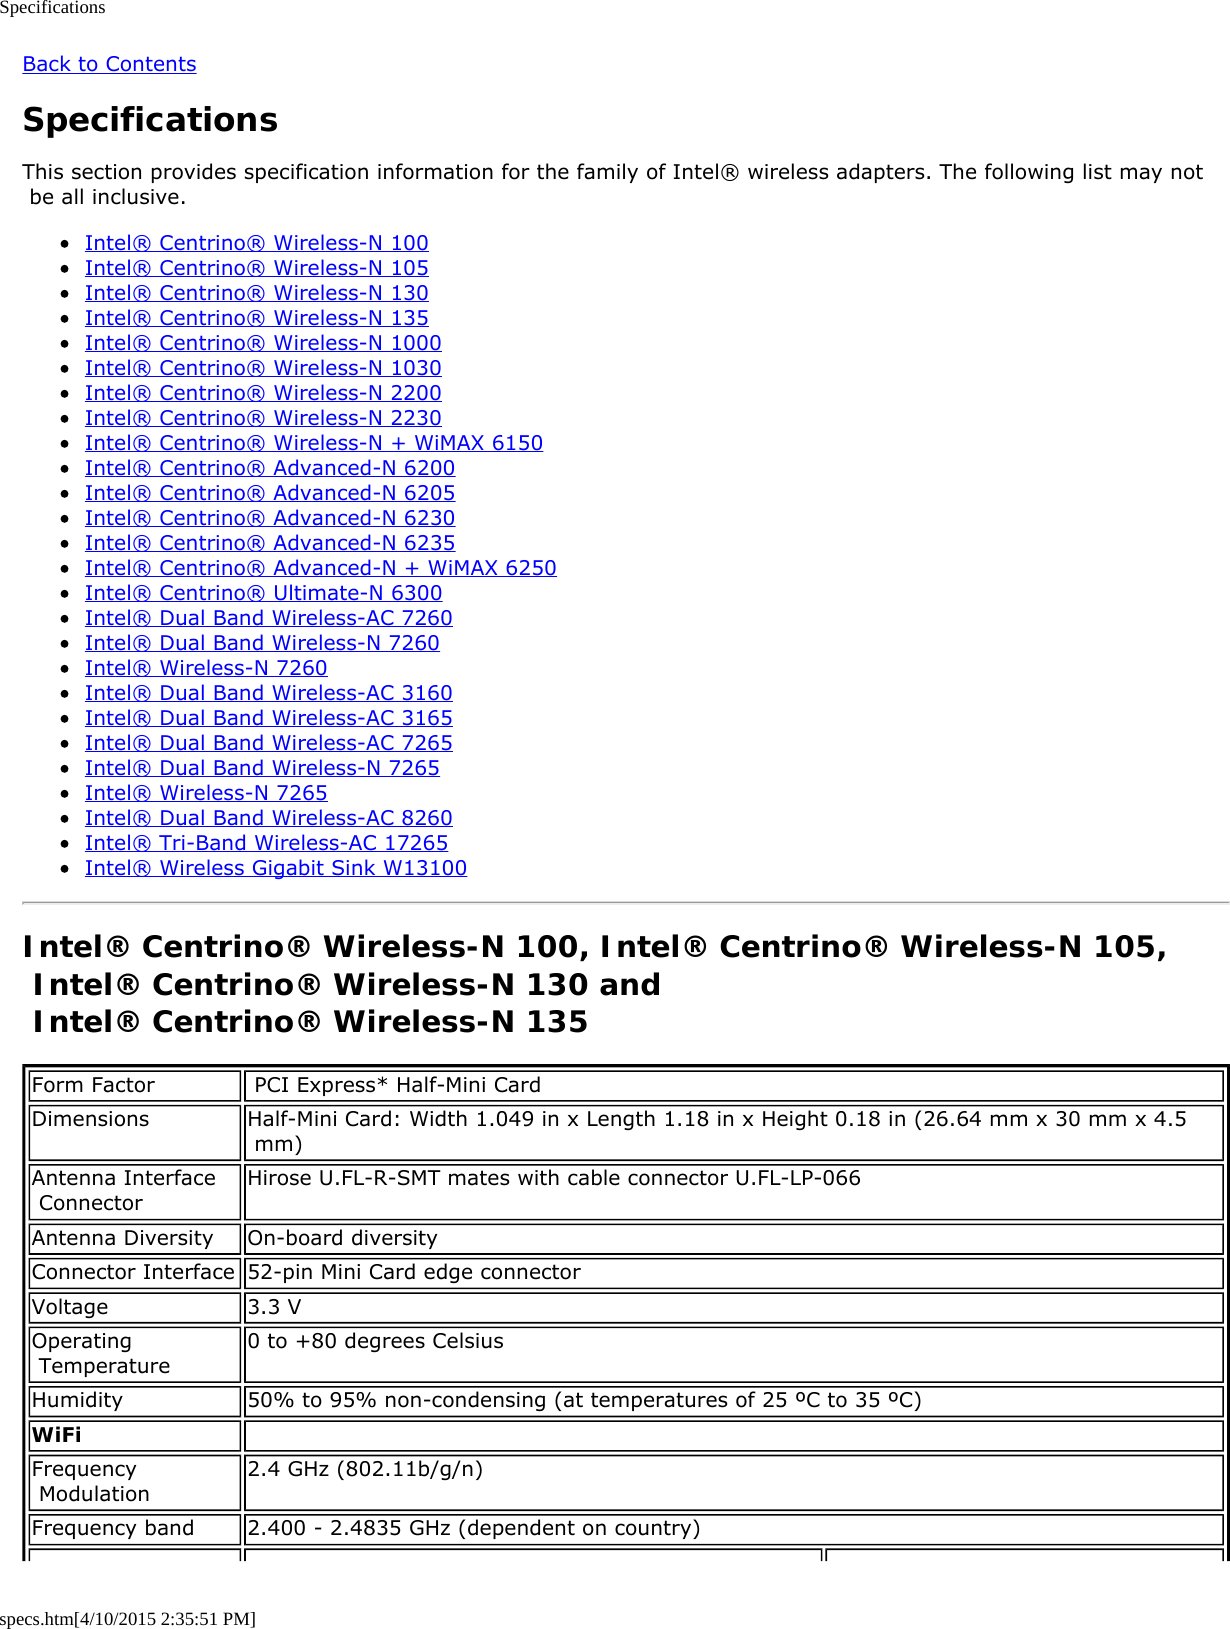 Specificationsspecs.htm[4/10/2015 2:35:51 PM]Back to ContentsSpecificationsThis section provides specification information for the family of Intel® wireless adapters. The following list may not be all inclusive.Intel® Centrino® Wireless-N 100Intel® Centrino® Wireless-N 105Intel® Centrino® Wireless-N 130Intel® Centrino® Wireless-N 135Intel® Centrino® Wireless-N 1000Intel® Centrino® Wireless-N 1030Intel® Centrino® Wireless-N 2200Intel® Centrino® Wireless-N 2230Intel® Centrino® Wireless-N + WiMAX 6150Intel® Centrino® Advanced-N 6200Intel® Centrino® Advanced-N 6205Intel® Centrino® Advanced-N 6230Intel® Centrino® Advanced-N 6235Intel® Centrino® Advanced-N + WiMAX 6250Intel® Centrino® Ultimate-N 6300Intel® Dual Band Wireless-AC 7260Intel® Dual Band Wireless-N 7260Intel® Wireless-N 7260Intel® Dual Band Wireless-AC 3160Intel® Dual Band Wireless-AC 3165Intel® Dual Band Wireless-AC 7265Intel® Dual Band Wireless-N 7265Intel® Wireless-N 7265Intel® Dual Band Wireless-AC 8260Intel® Tri-Band Wireless-AC 17265Intel® Wireless Gigabit Sink W13100Intel® Centrino® Wireless-N 100, Intel® Centrino® Wireless-N 105, Intel® Centrino® Wireless-N 130 and  Intel® Centrino® Wireless-N 135Form Factor  PCI Express* Half-Mini CardDimensions Half-Mini Card: Width 1.049 in x Length 1.18 in x Height 0.18 in (26.64 mm x 30 mm x 4.5 mm)Antenna Interface ConnectorHirose U.FL-R-SMT mates with cable connector U.FL-LP-066Antenna Diversity On-board diversityConnector Interface 52-pin Mini Card edge connectorVoltage 3.3 VOperating Temperature0 to +80 degrees CelsiusHumidity 50% to 95% non-condensing (at temperatures of 25 ºC to 35 ºC)WiFi  Frequency Modulation2.4 GHz (802.11b/g/n)Frequency band 2.400 - 2.4835 GHz (dependent on country)